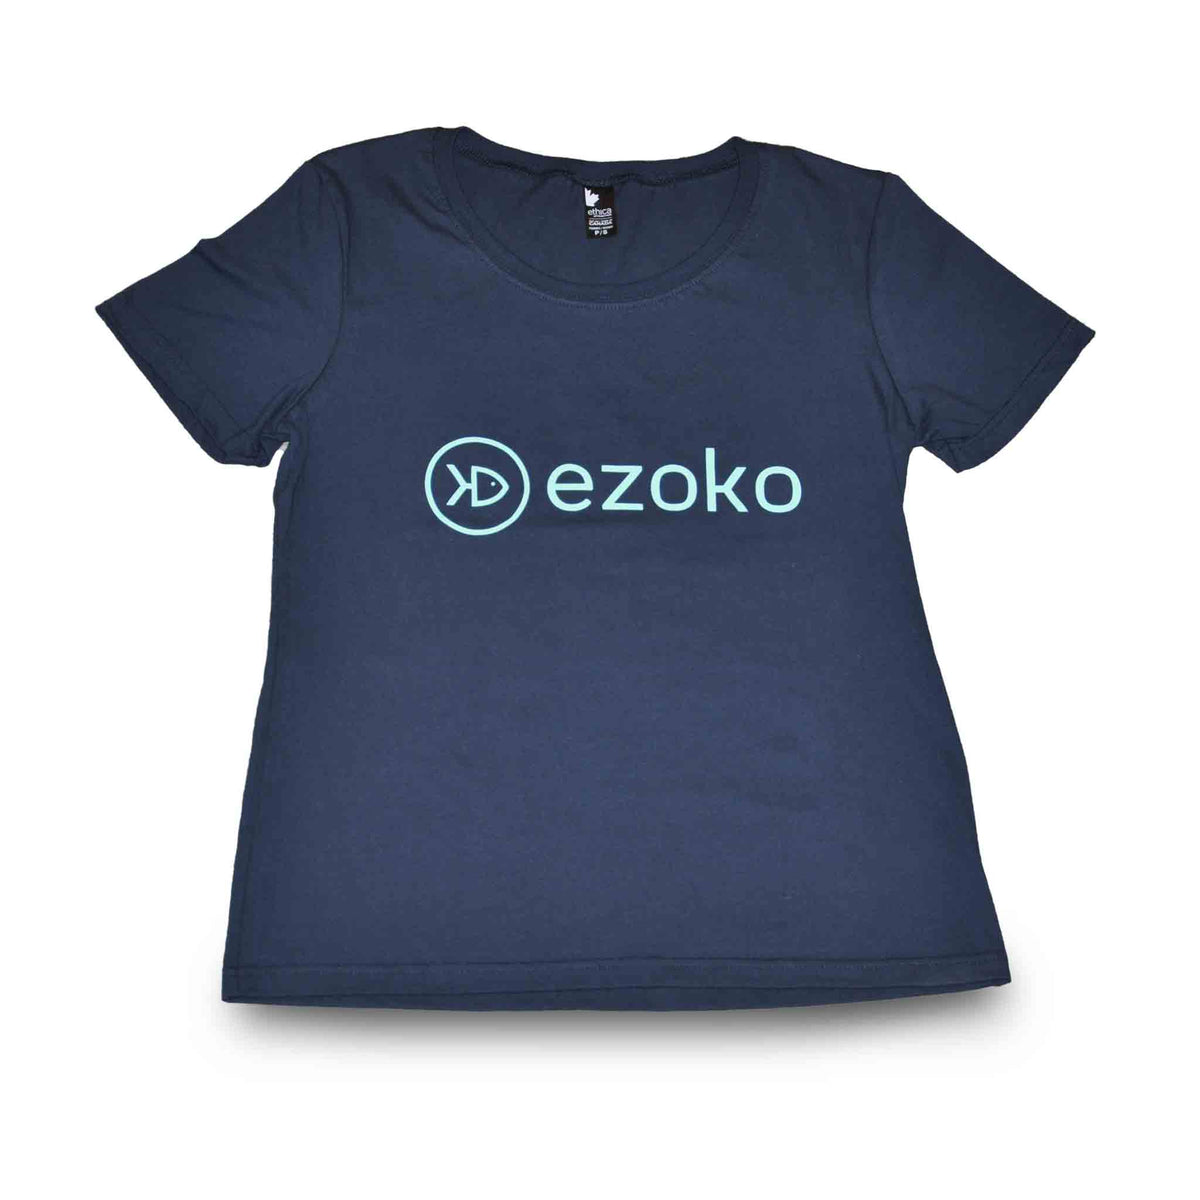 Front view of women EZOKO t-shirt with green EZOKO logo on the chest, color navy blue